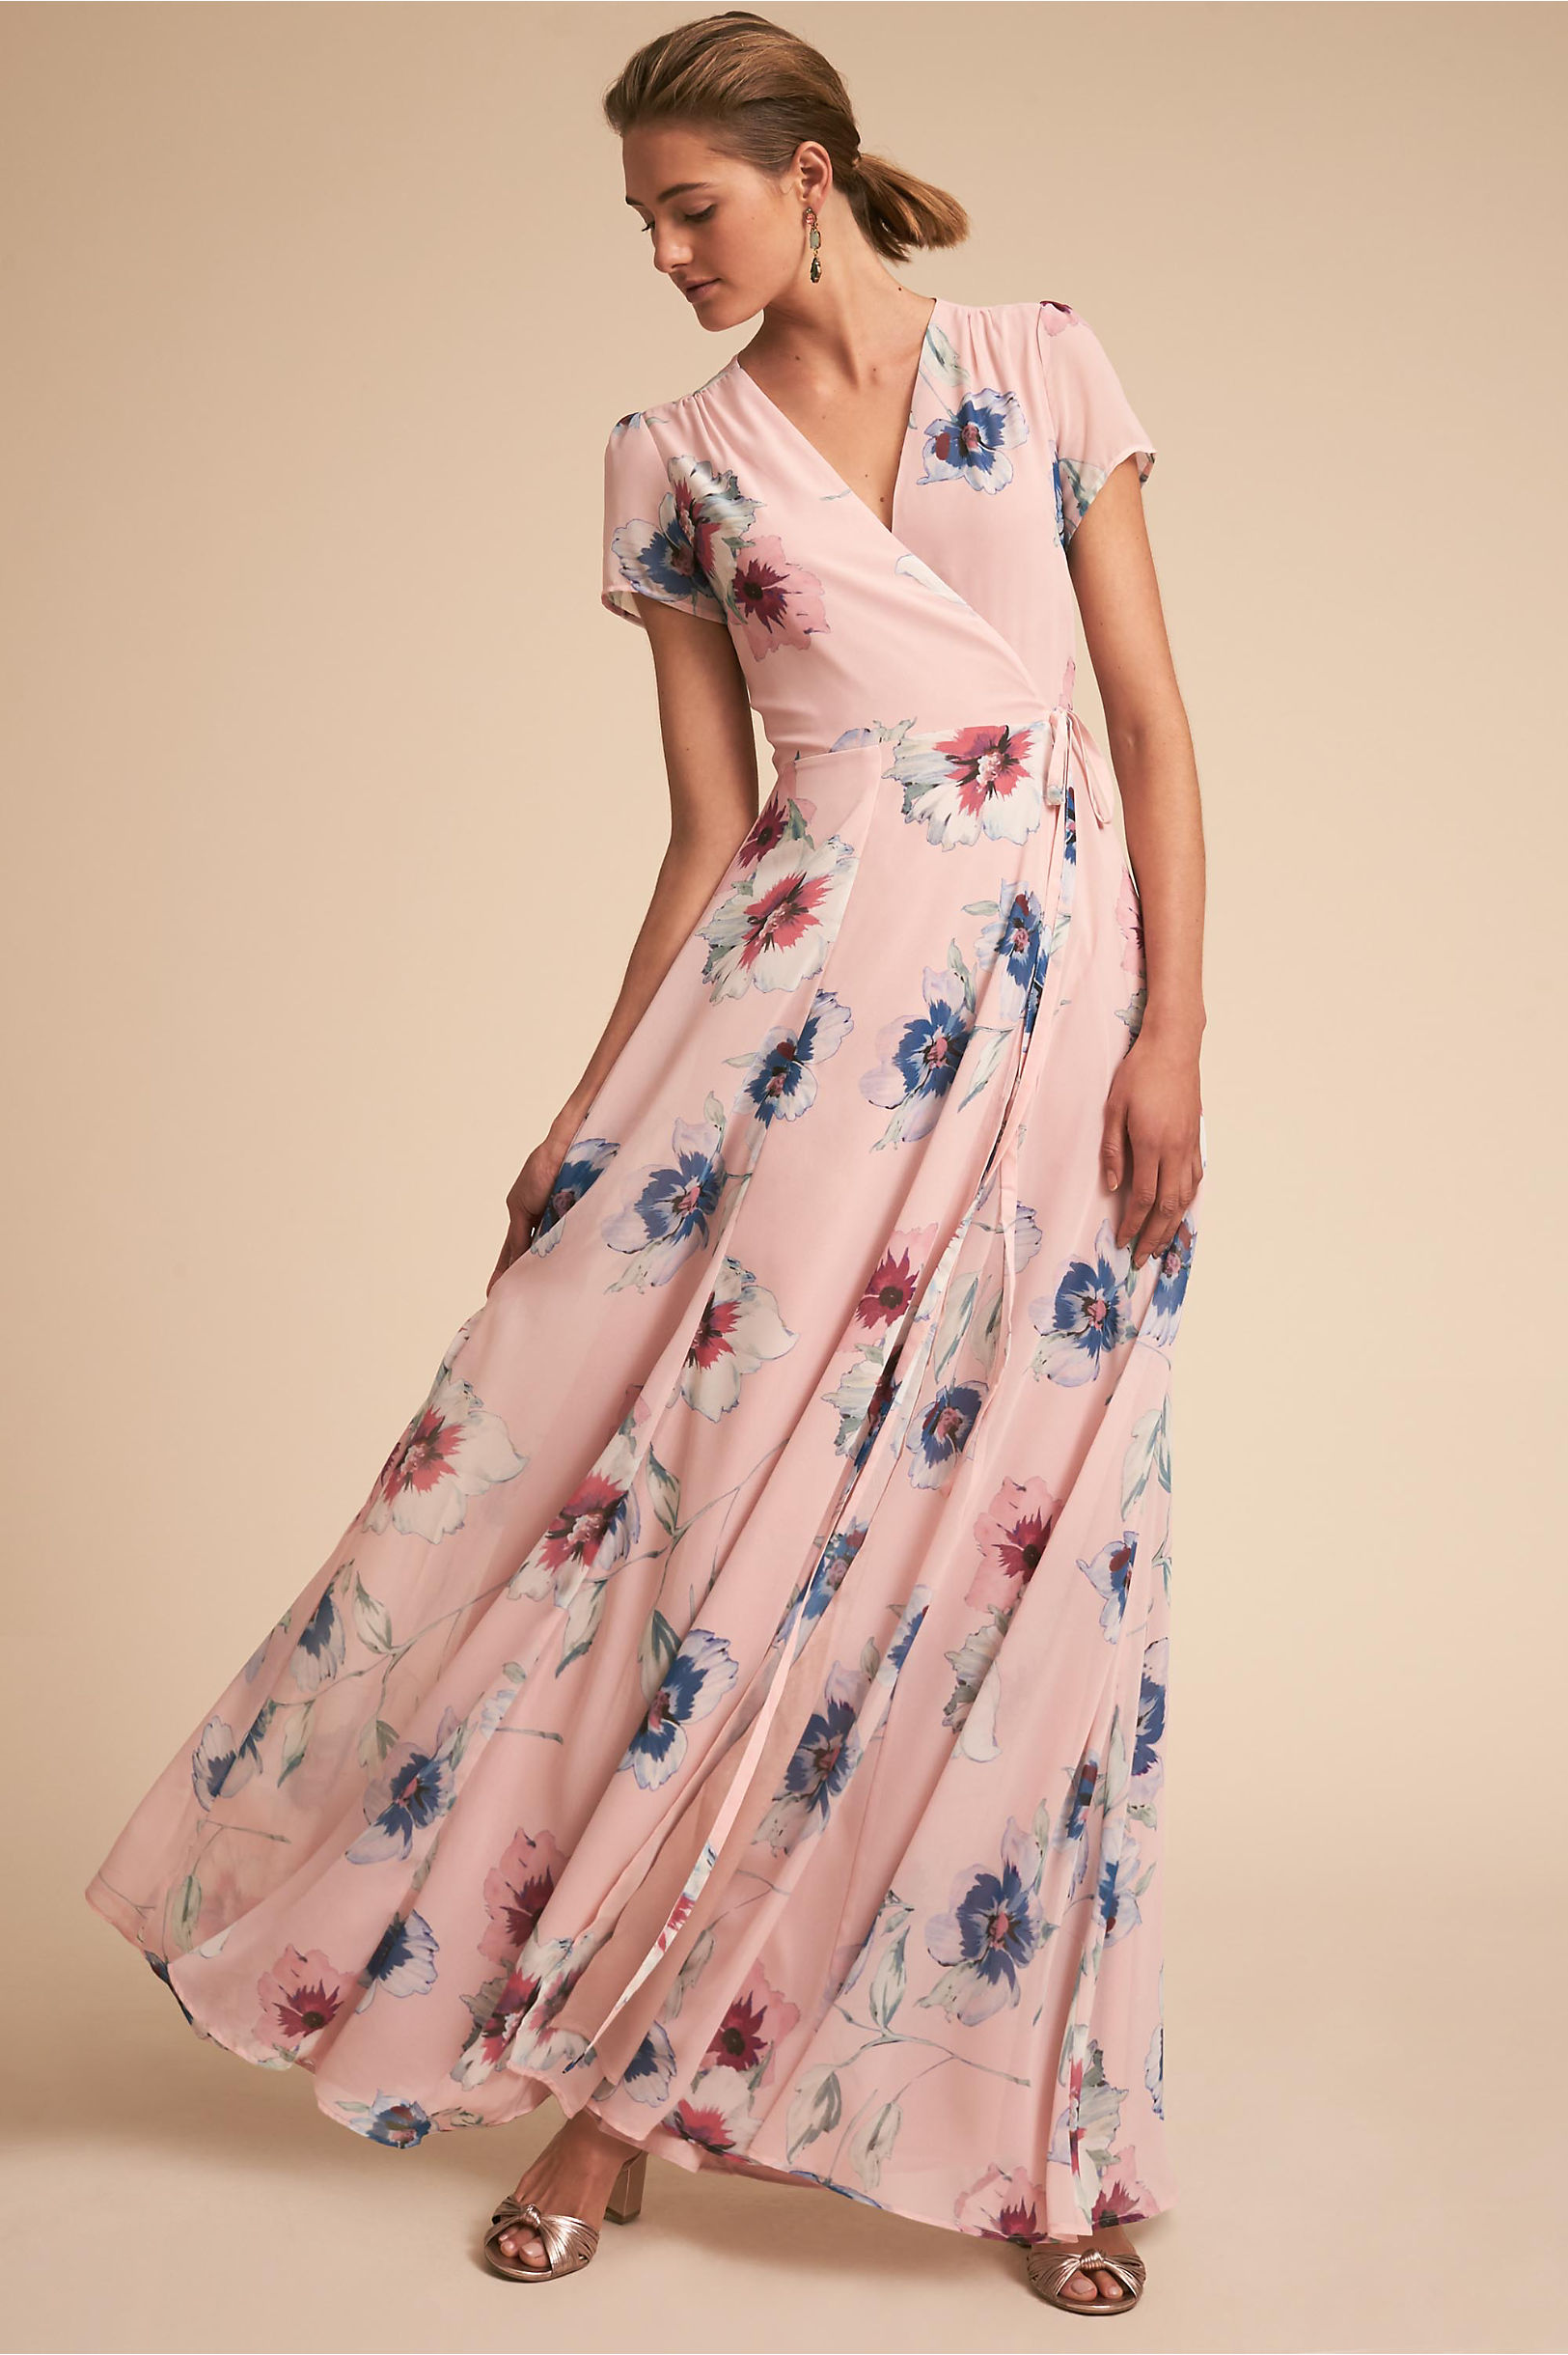 Calypso Dress in Forget Me Not Blush